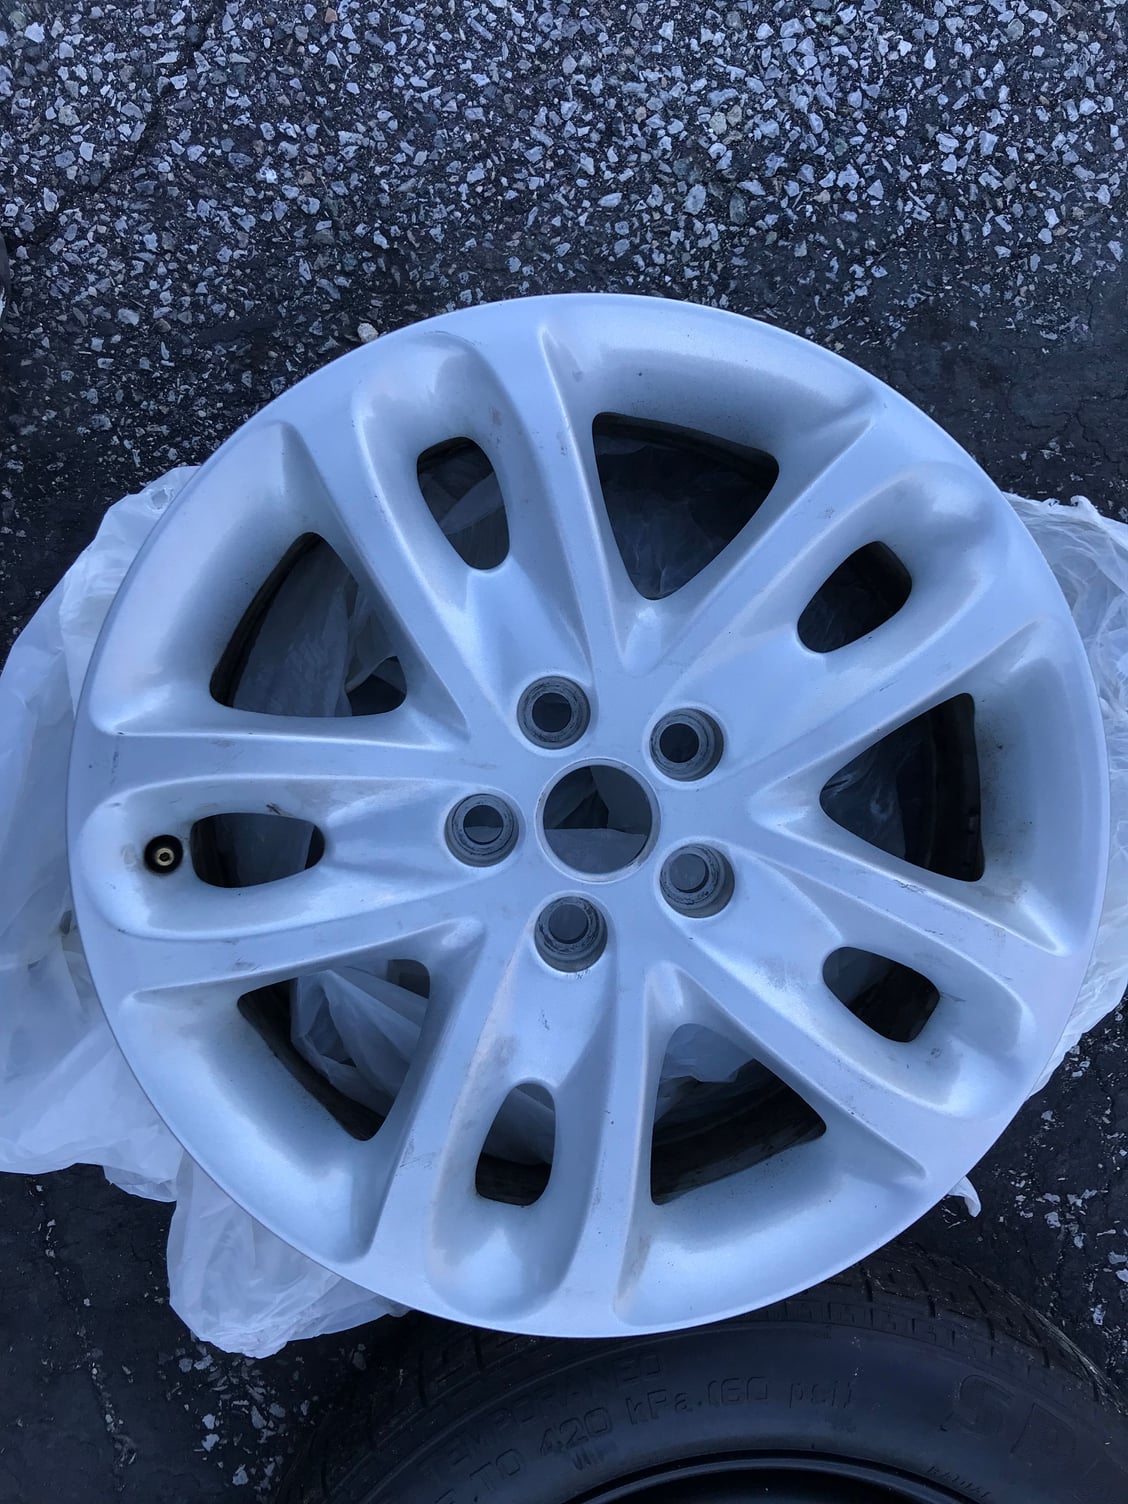 Wheels and Tires/Axles - 4 Aguila Rims and Factory Spare - Used - 2002 to 2008 Jaguar X-Type - Suffolk County, NY 11730, United States